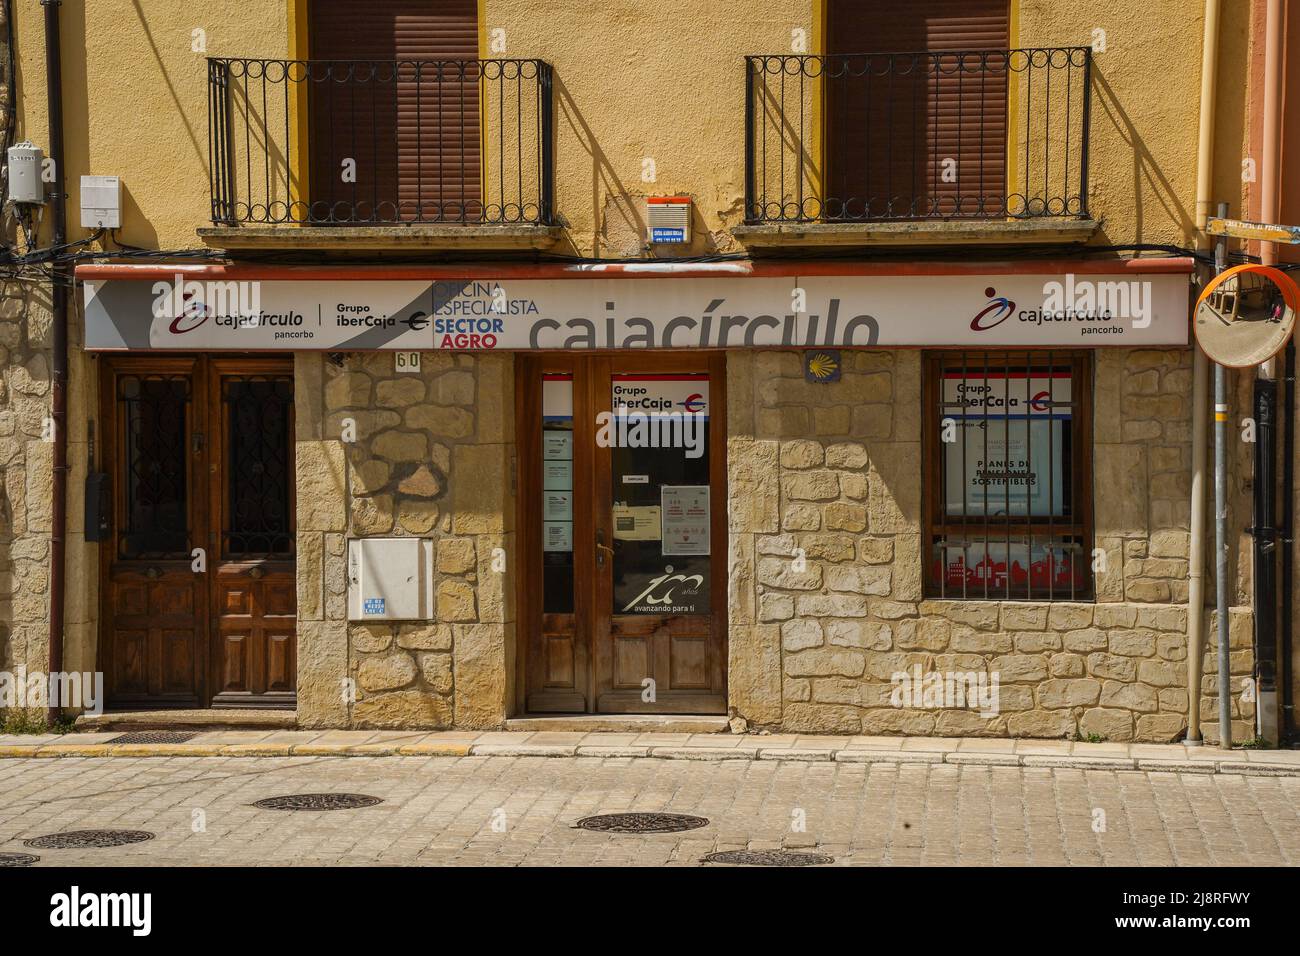 Pancorbo Spain, caja circulo bank in the province of Burgos, Castile and  León, Spain Stock Photo - Alamy